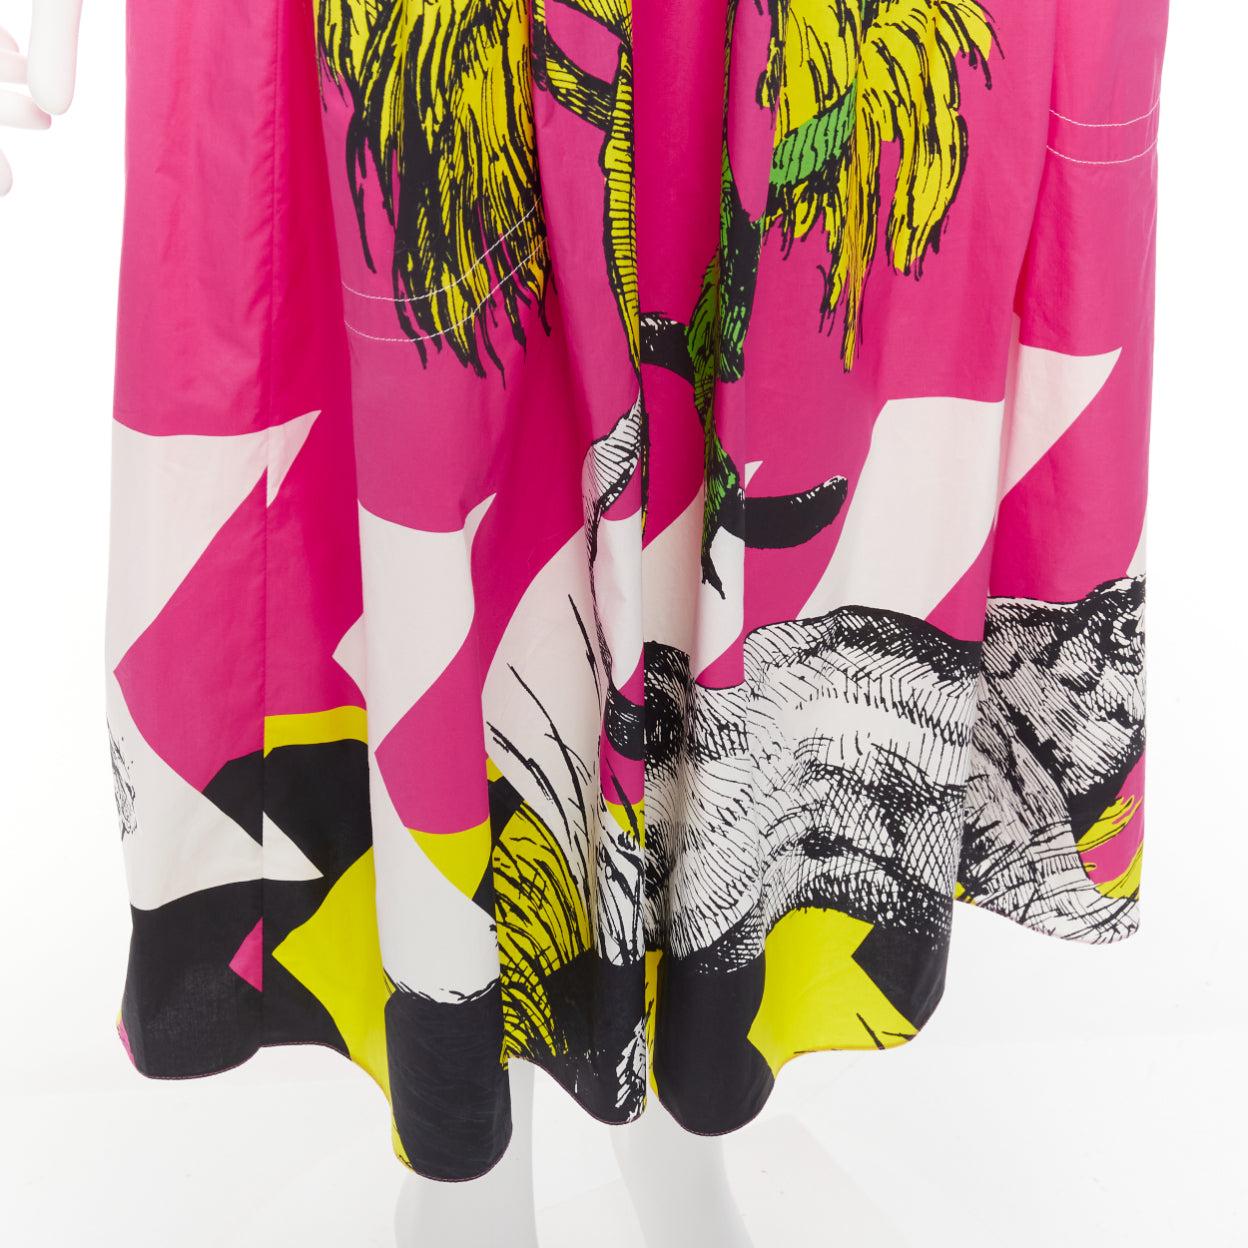 CHRISTIAN DIOR D-Jungle pink pop tiger graphic print poplin cotton skirt FR34 XS
Reference: AAWC/A00595
Brand: Christian Dior
Designer: Maria Grazia Chiuri
Collection: D-Jungle
Material: Cotton
Color: Pink
Pattern: Graphic
Closure: Zip
Extra